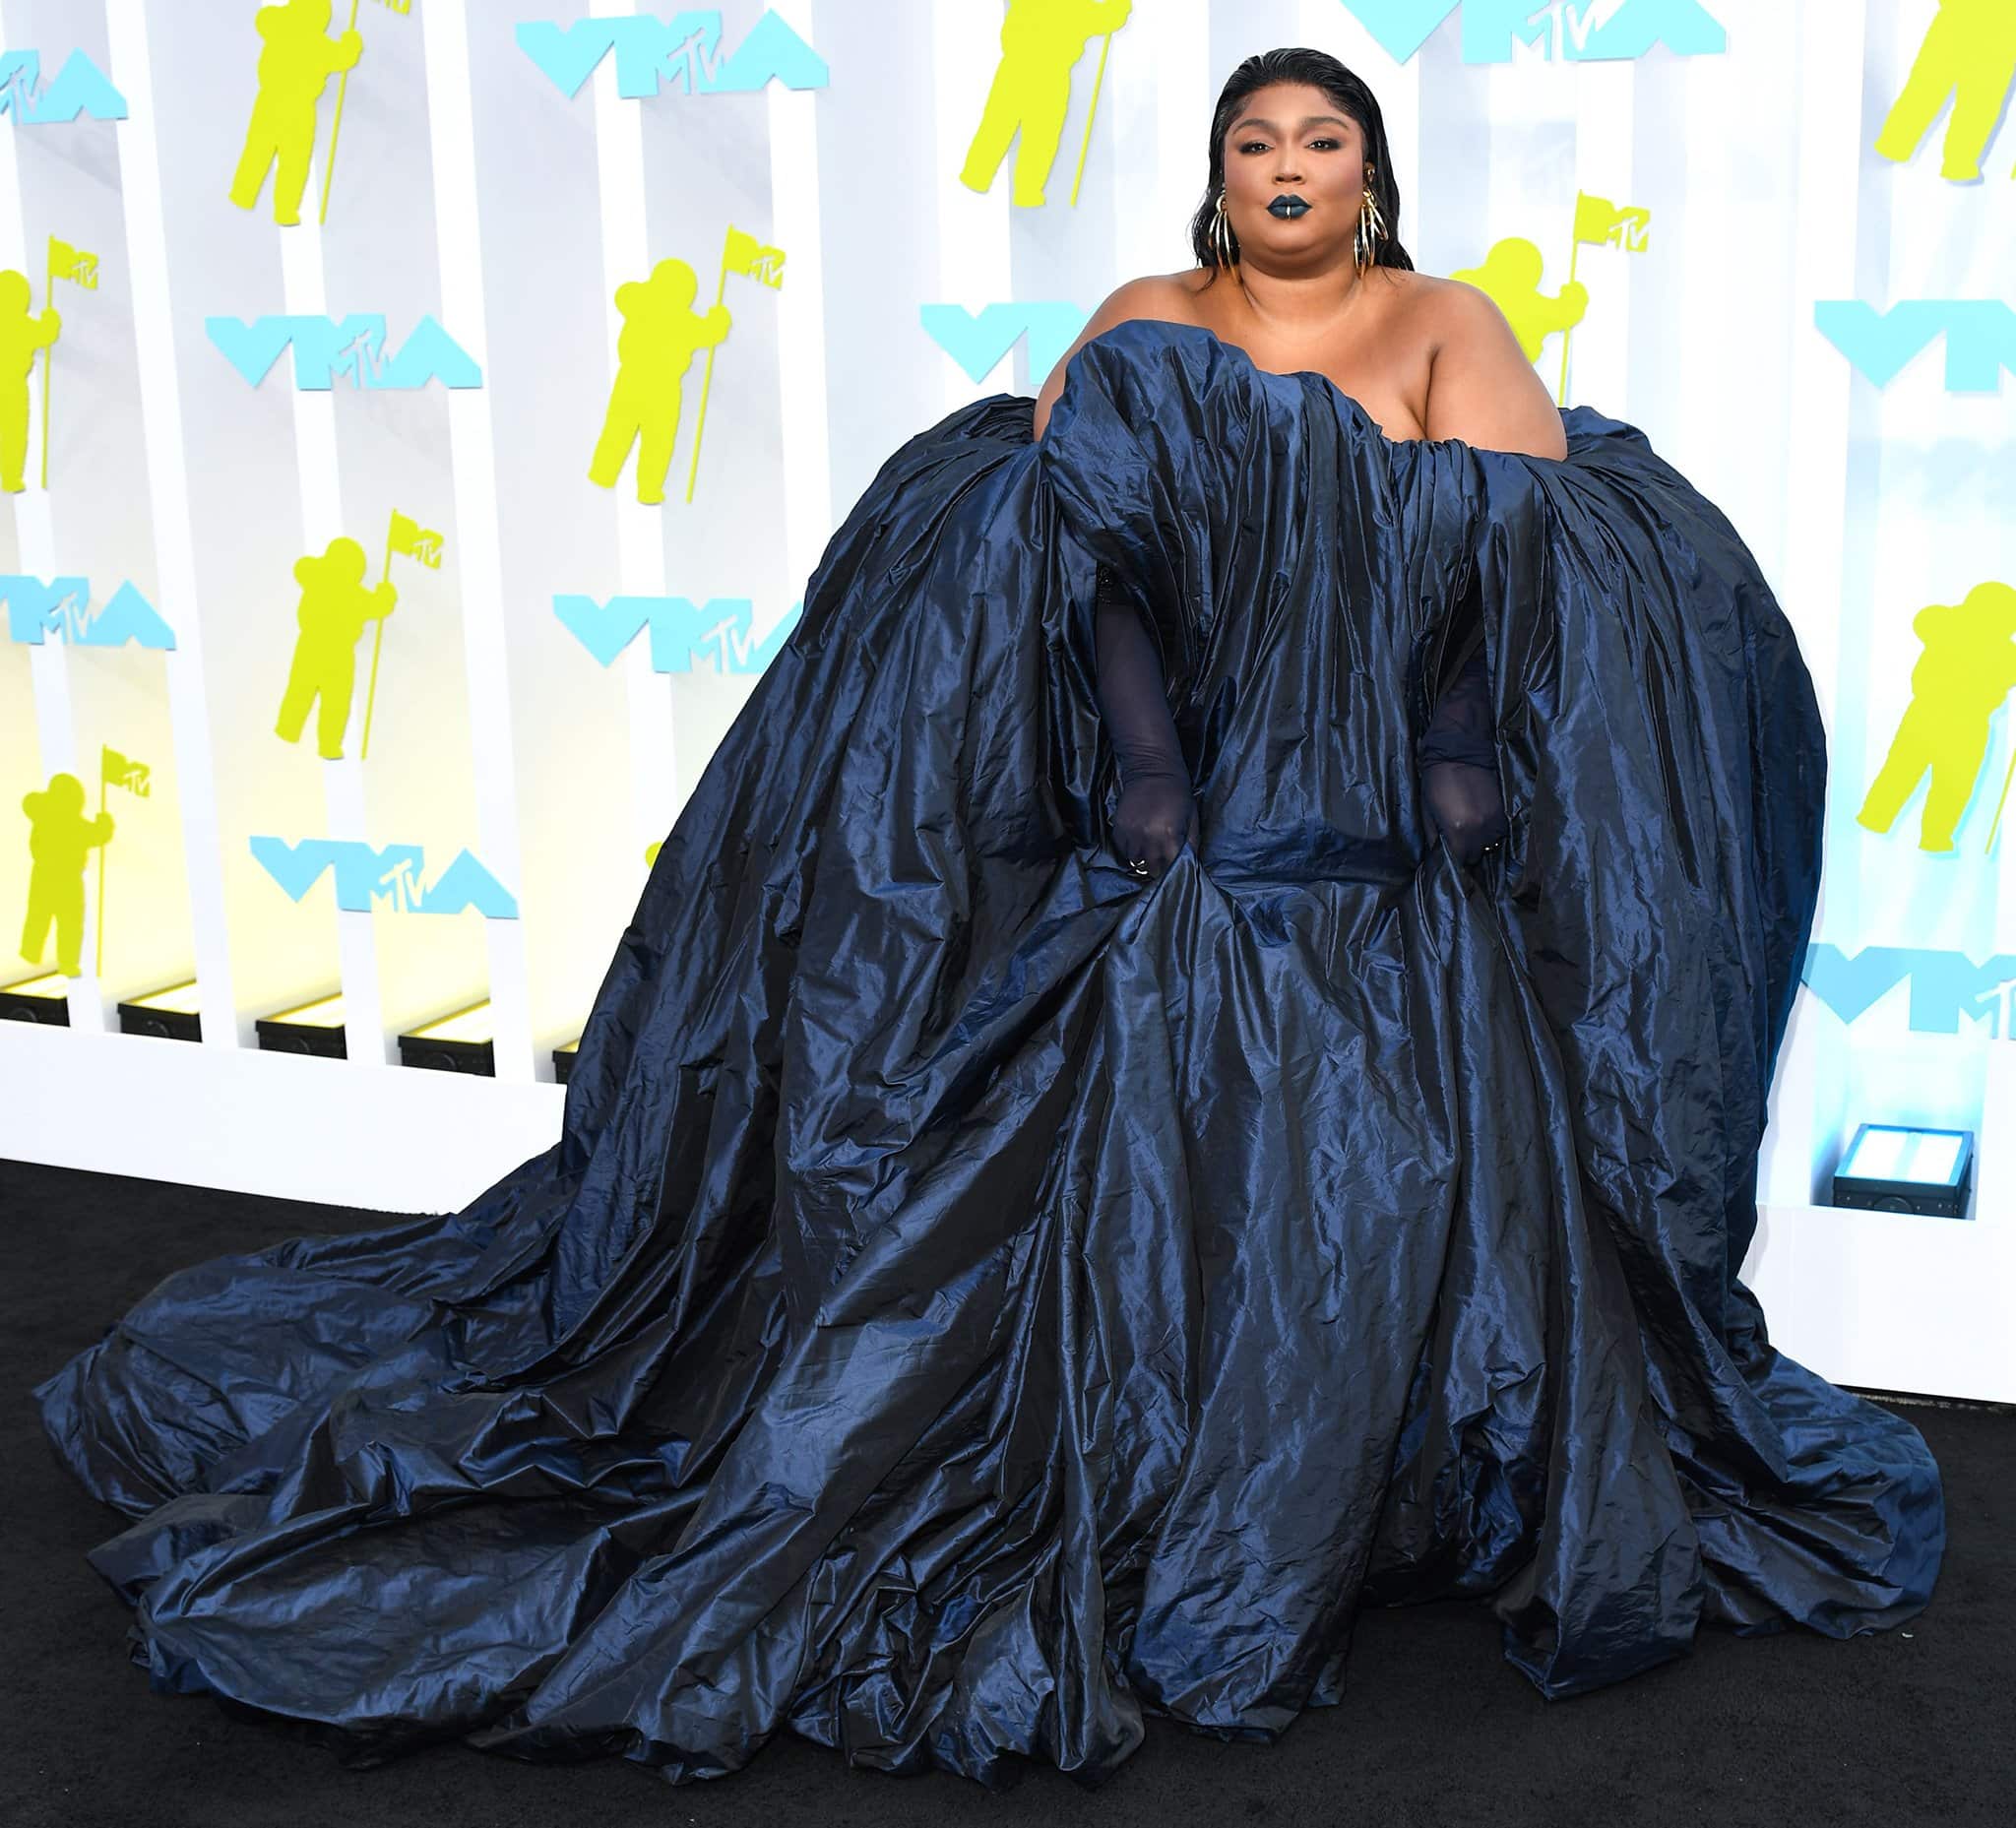 Lizzo arrives on the red carpet in a voluminous iridescent navy gown by Glenn Martens for Jean Paul Gaultier’s Spring/Summer 2022 Couture collection